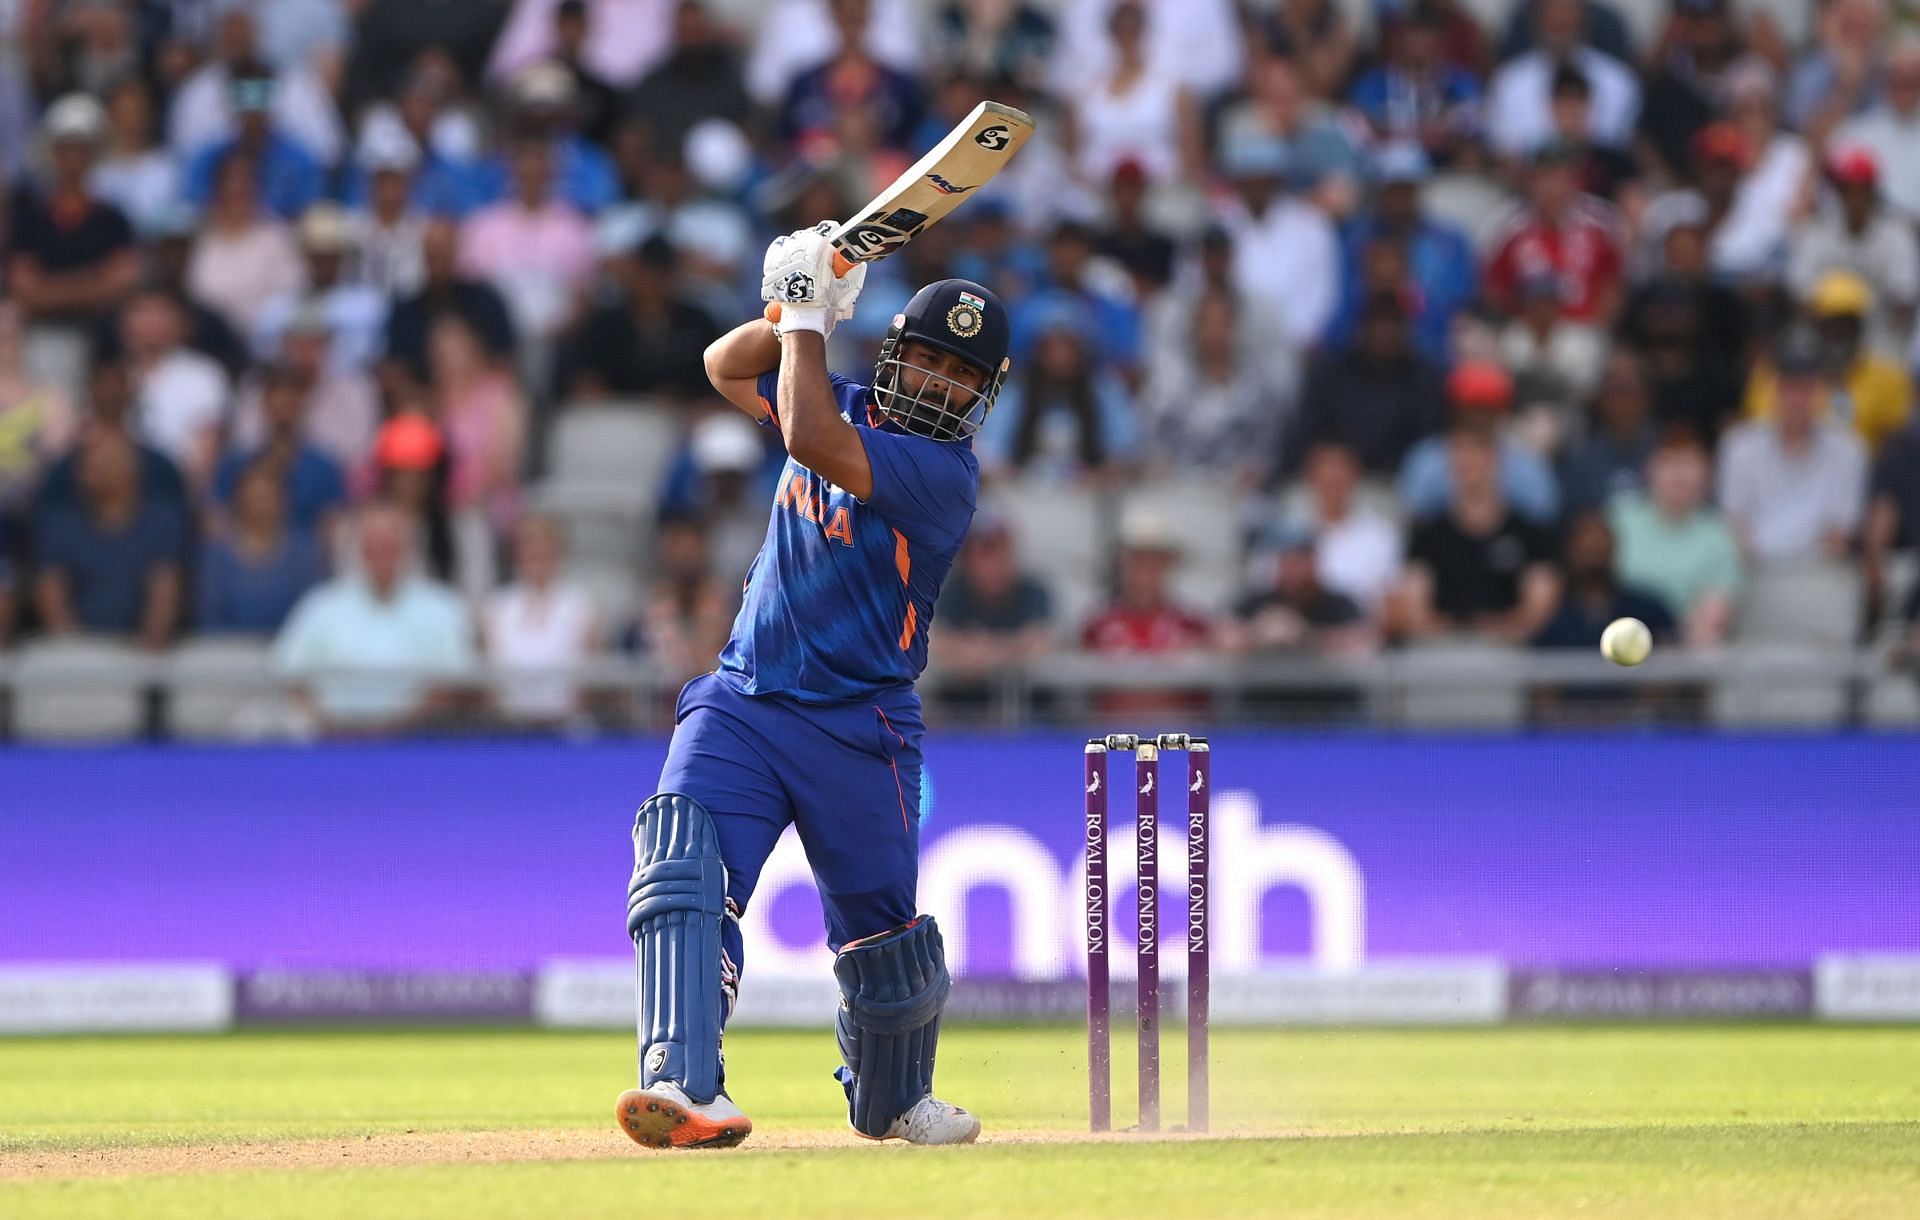 Aakash Chopra expects Rishabh Pant to continue opening for Team India